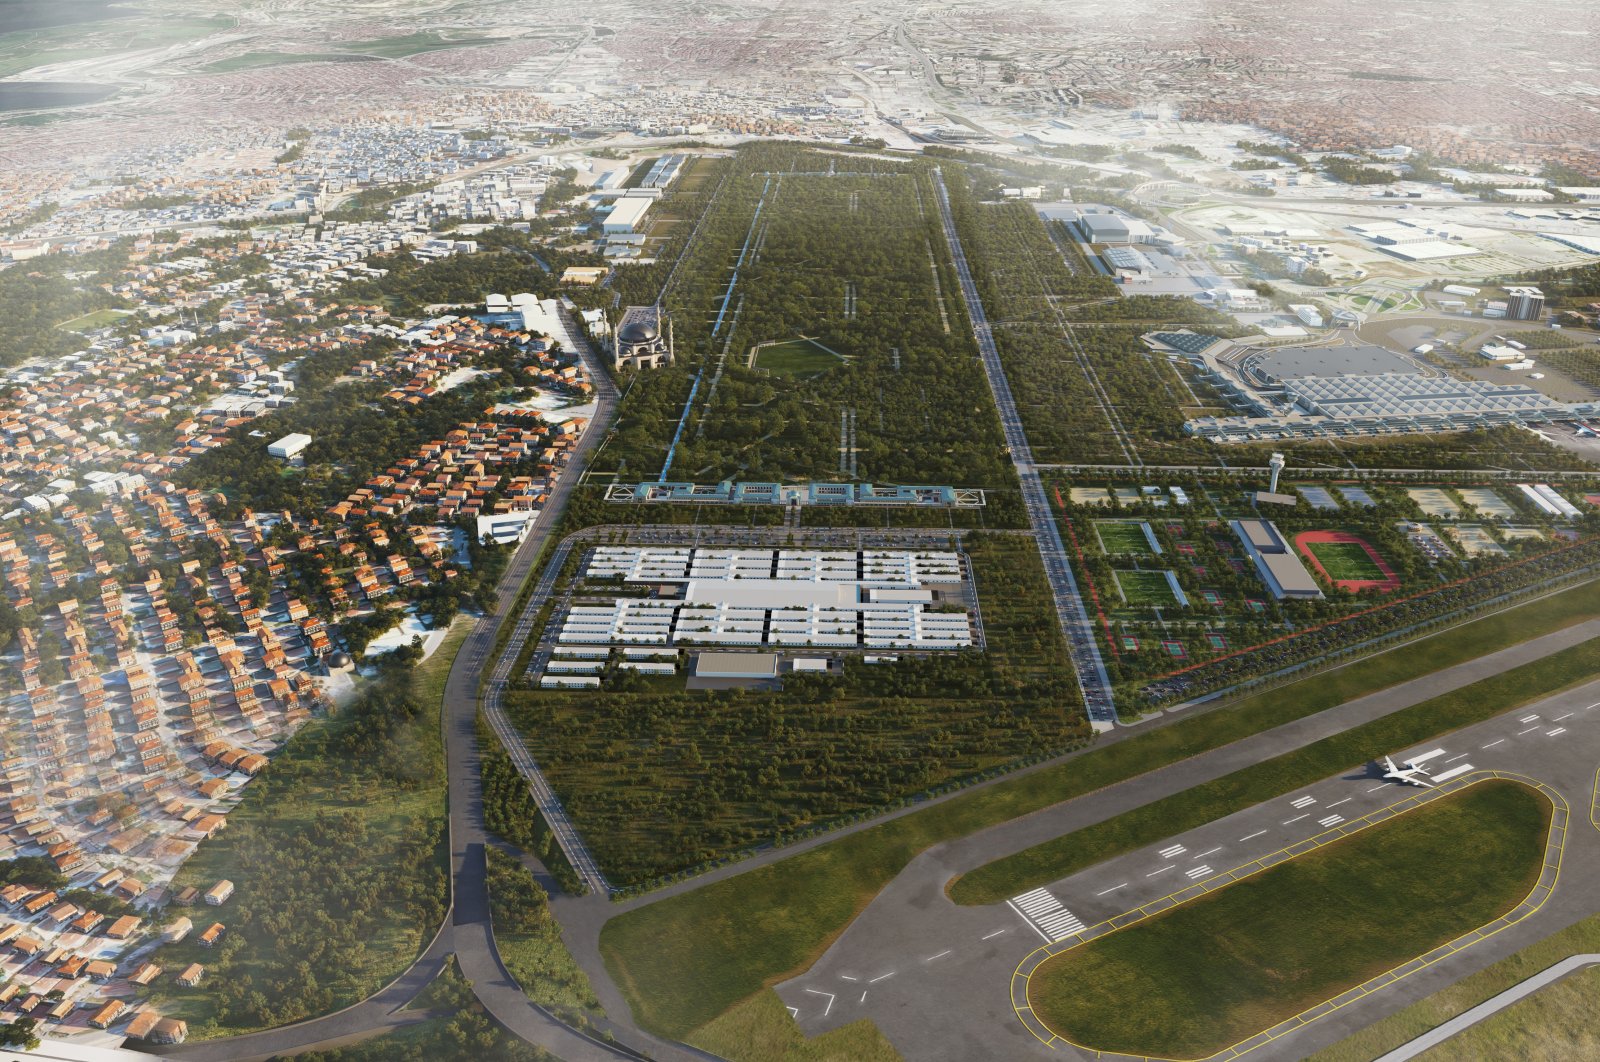 An illustration provided by the Ministry of Environment, Urban Planning and Climate Change shows an aerial view of the planned project. (AA PHOTO)